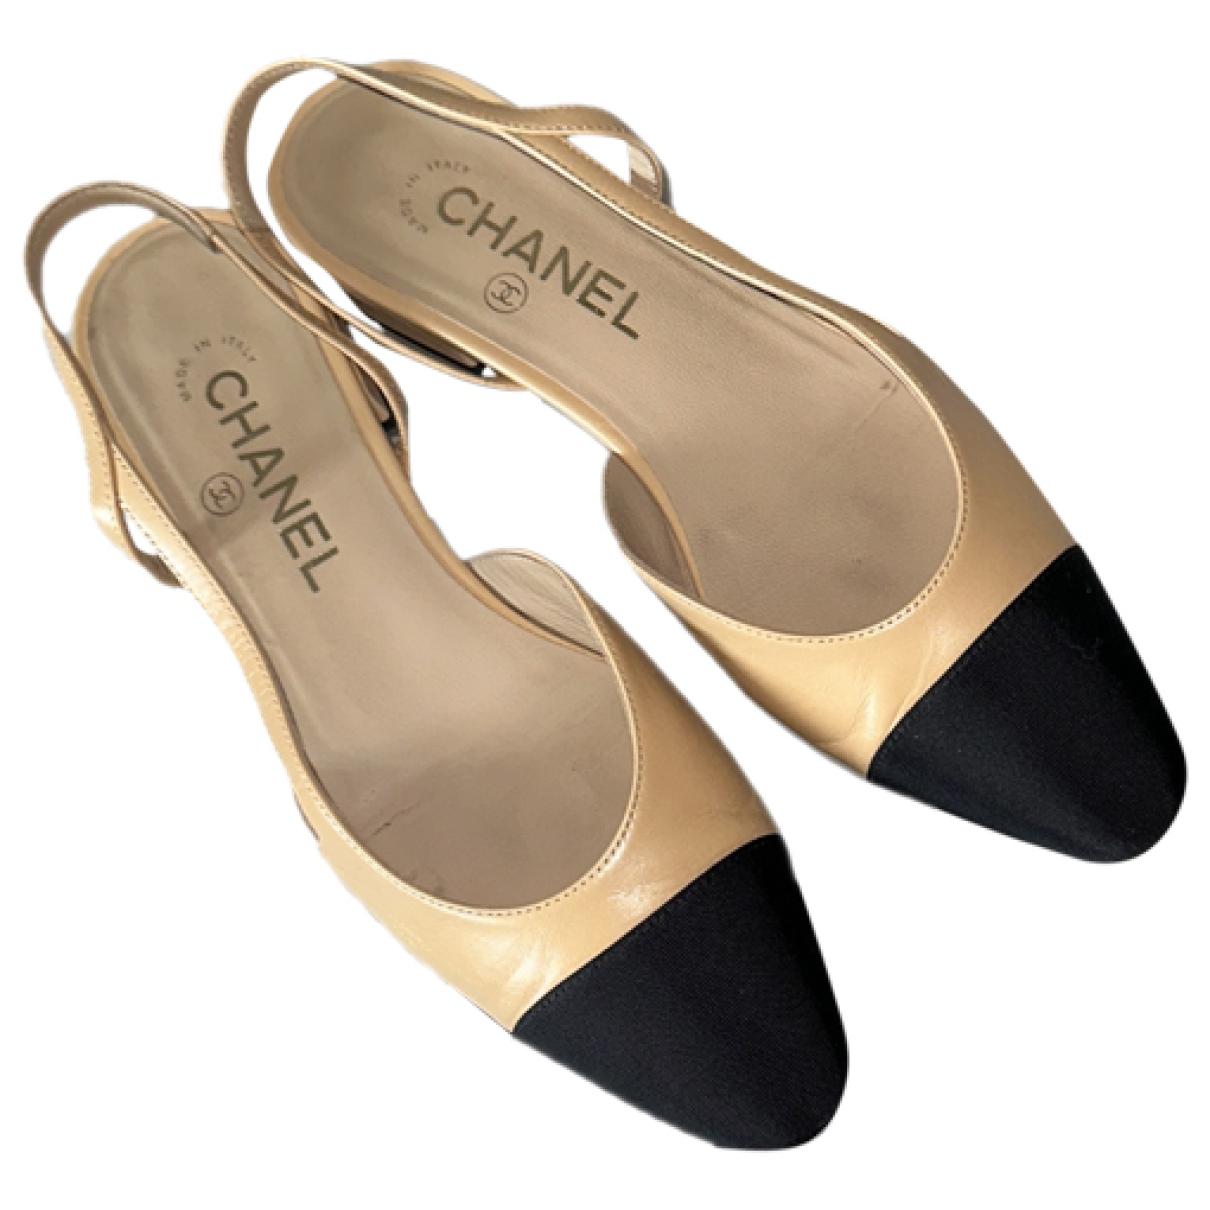 Cambon leather ballet flats Chanel Black size 37 EU in Leather